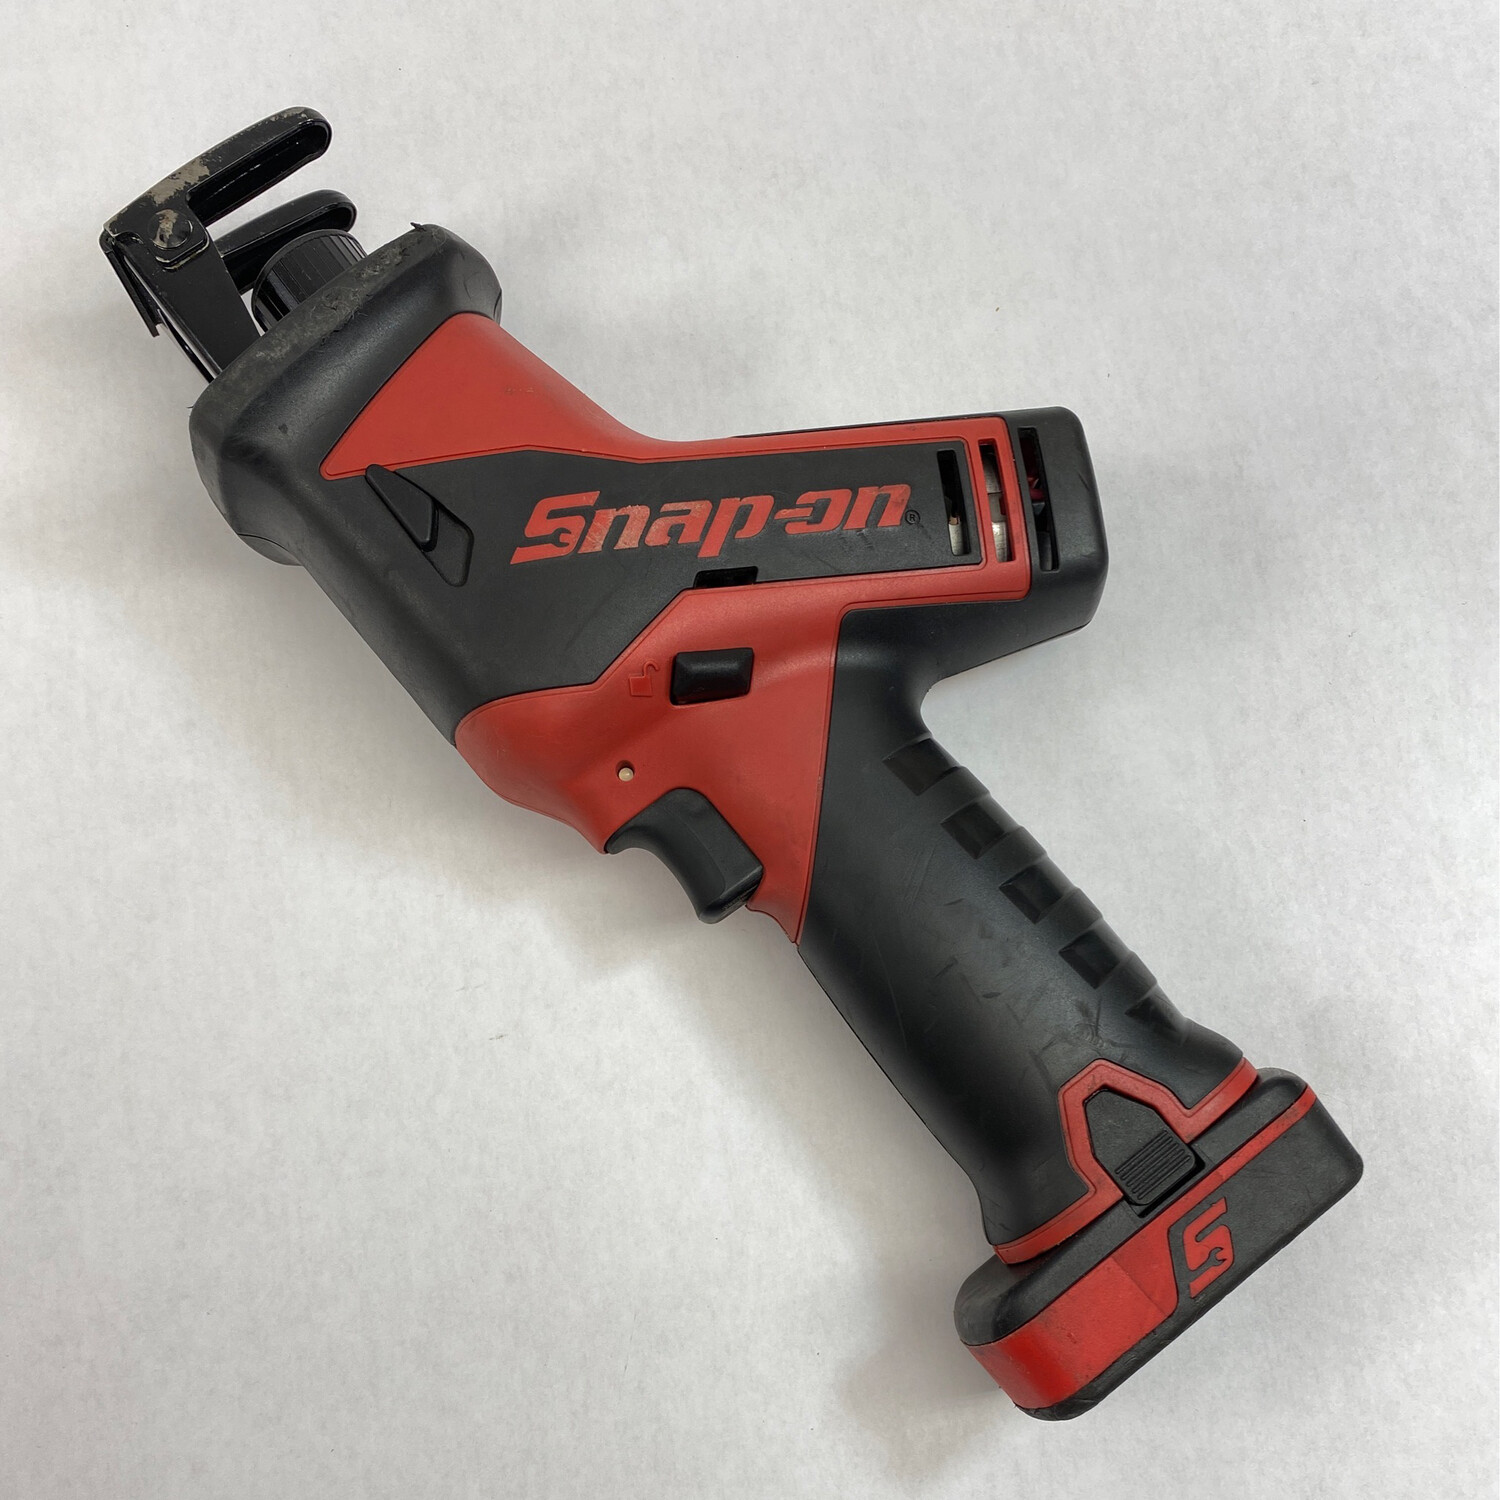 Snap On Reciprocating Saw With Battery, CTRS761